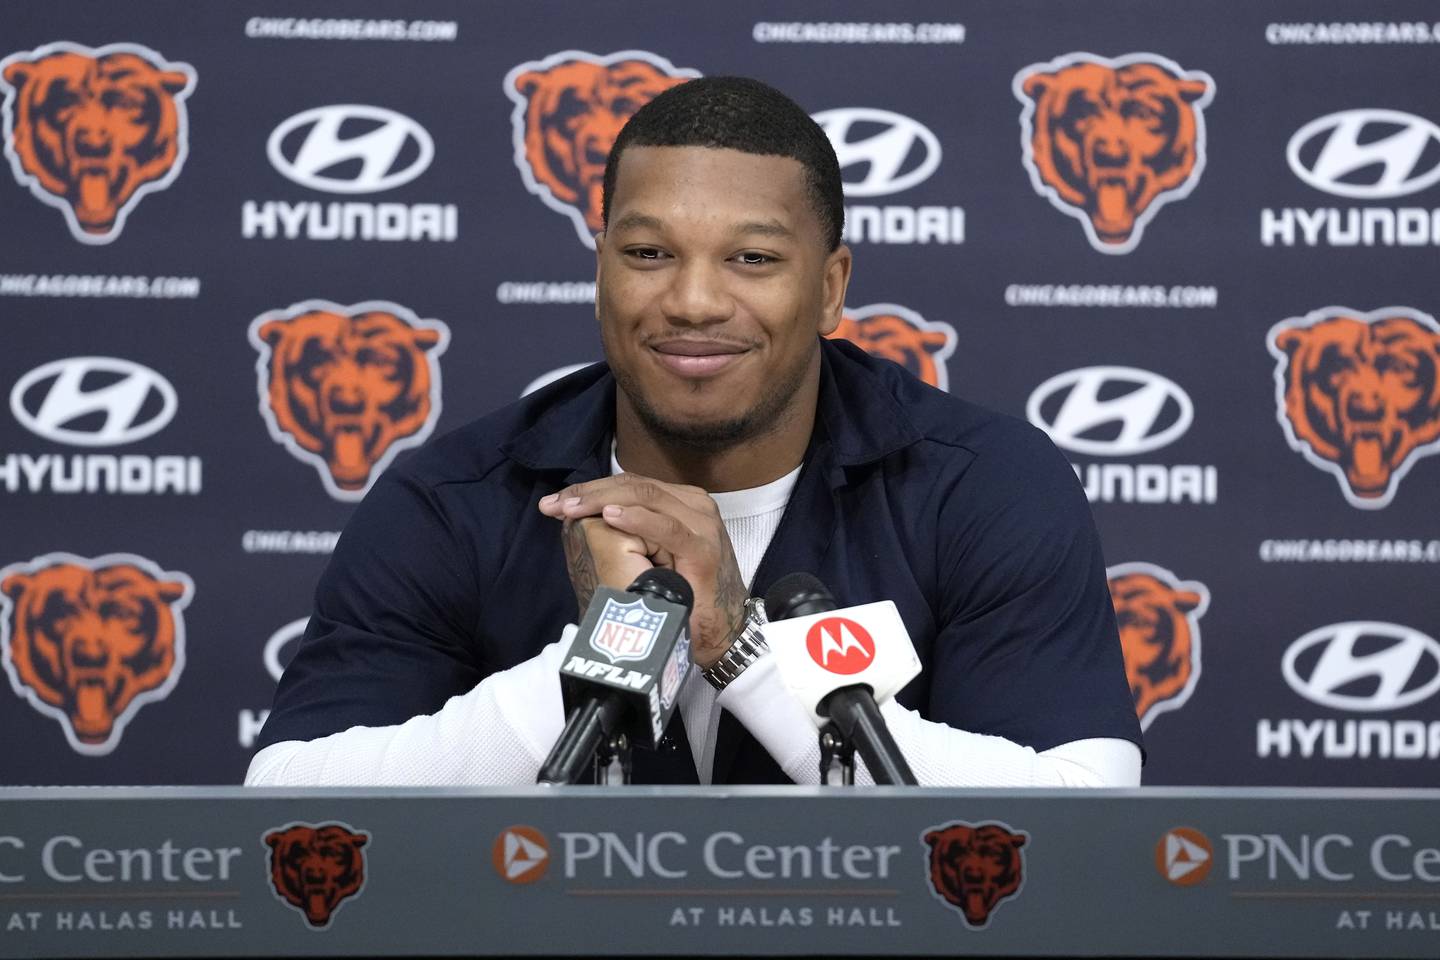 Chicago Bears wide receiver DJ Moore smiles as he listens to a question during a news conference, Thursday, March 16, 2023 at Halas Hall in Lake Forest.